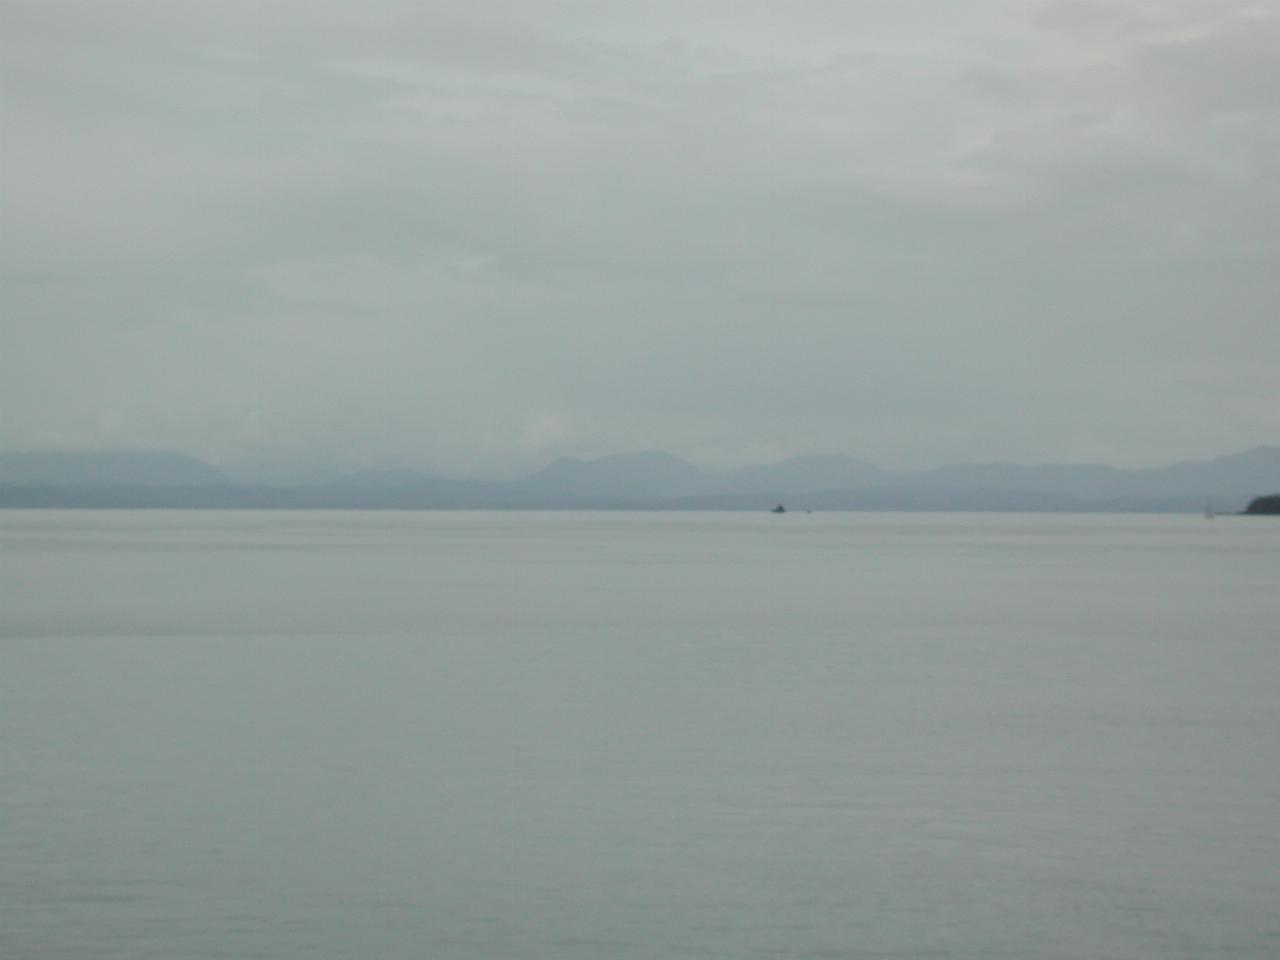 Looking from passenger loading dock towards BC mainland from Port Hardy